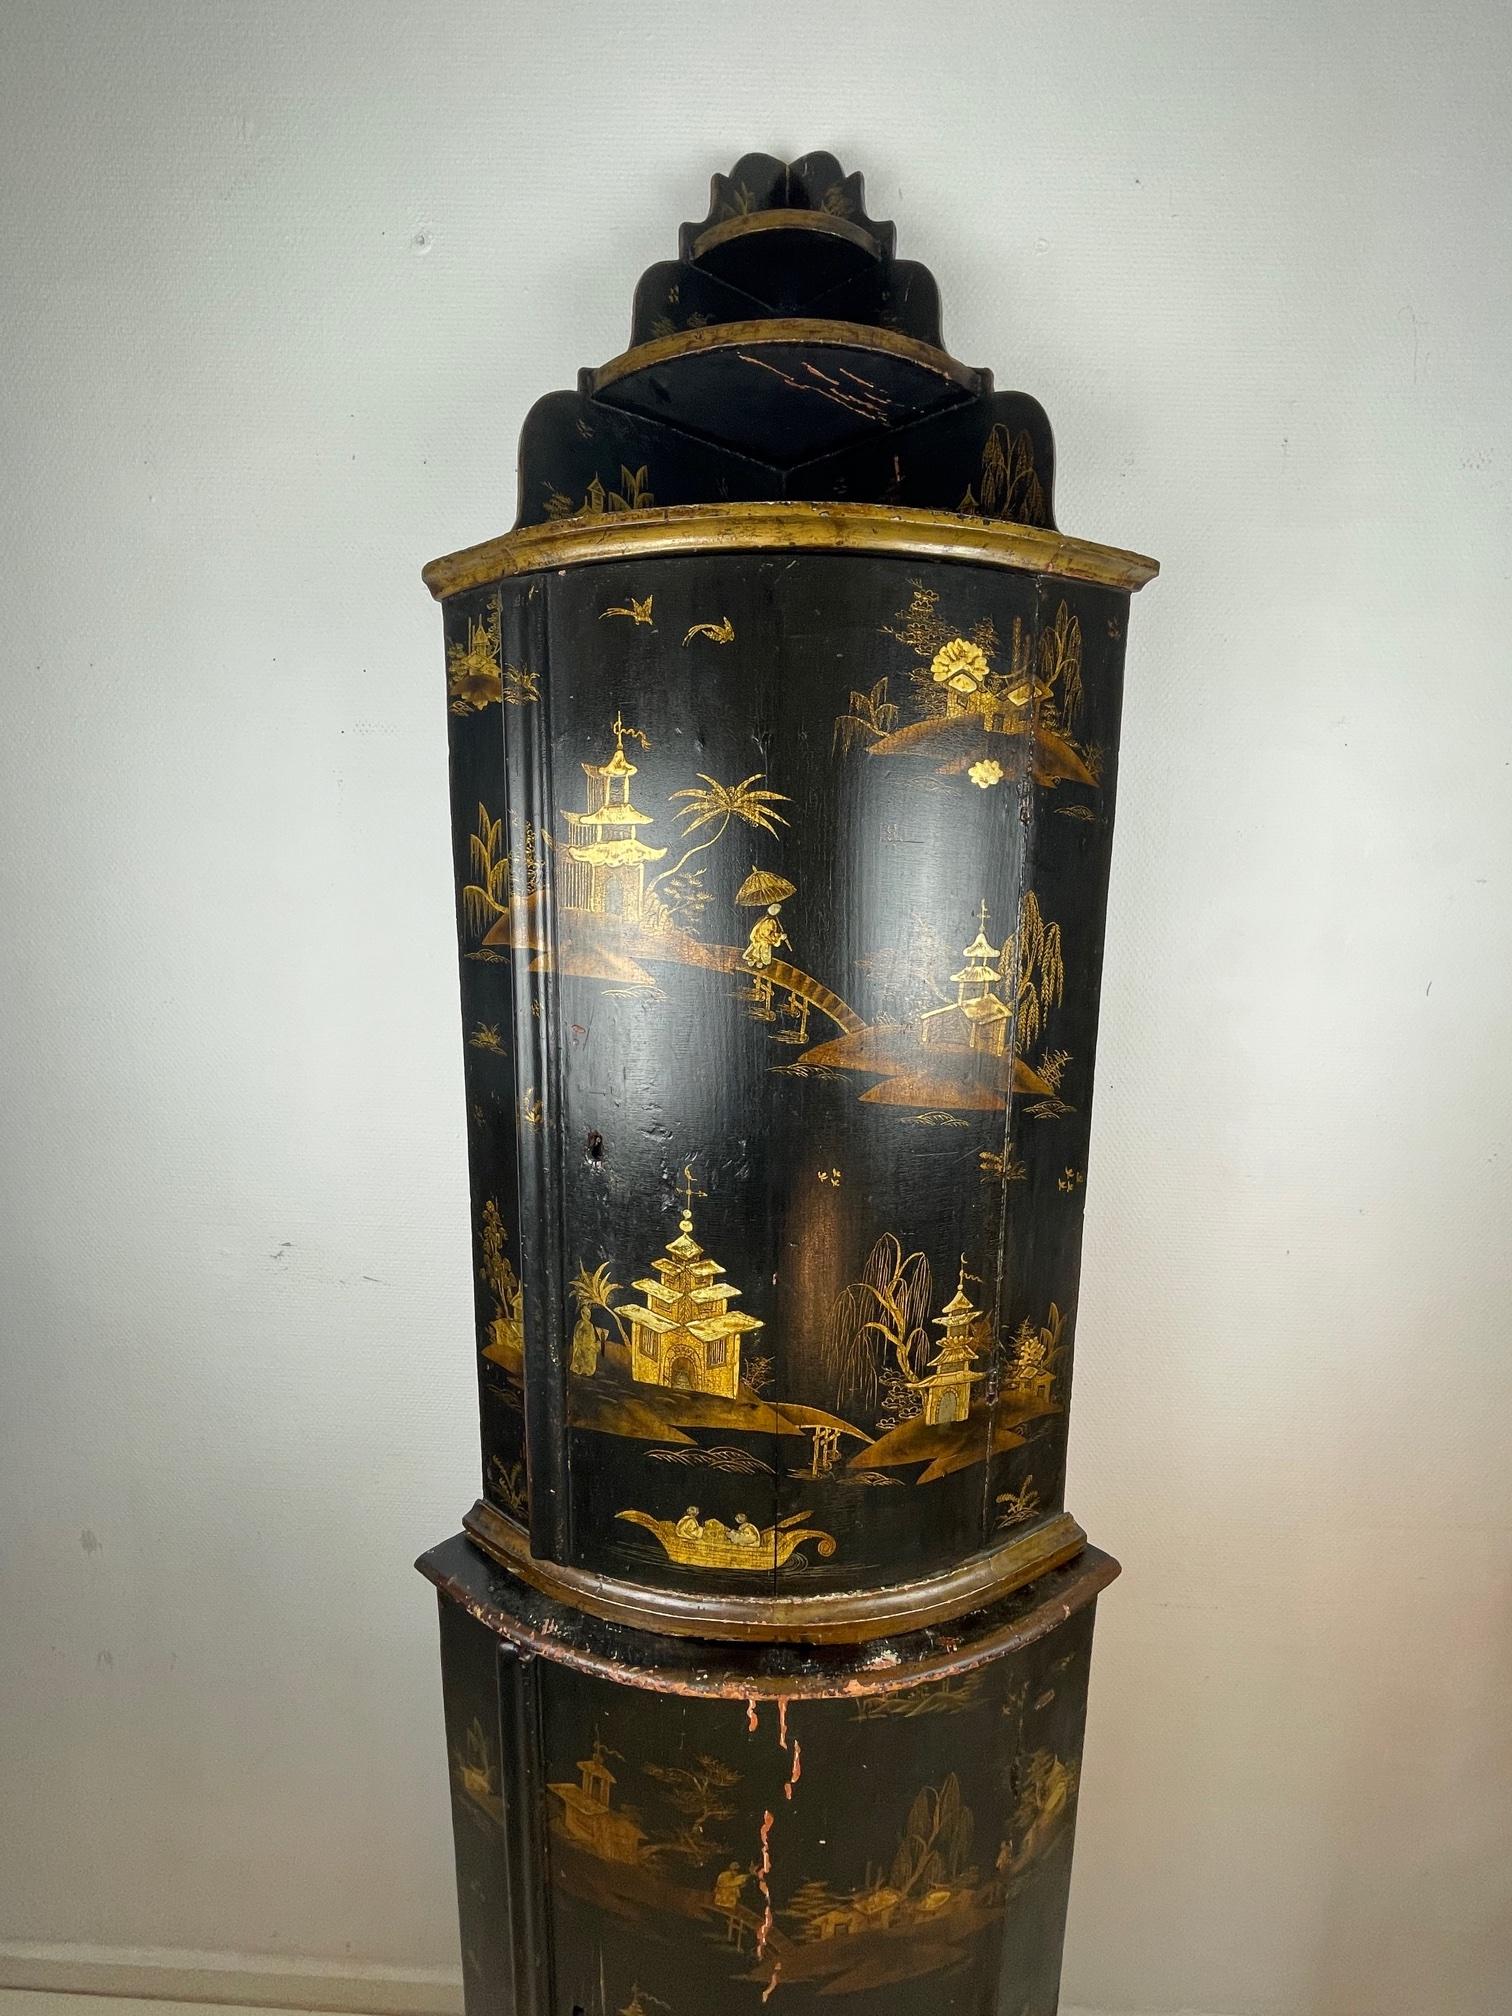 What a beautiful item! This corner cabinet is at least 130 years old. But most probably much older. This black lacquer corner cabinet is rare. It is a must have for everybody who loves Asian Antiques. It is used, it has signs of usage, but it is